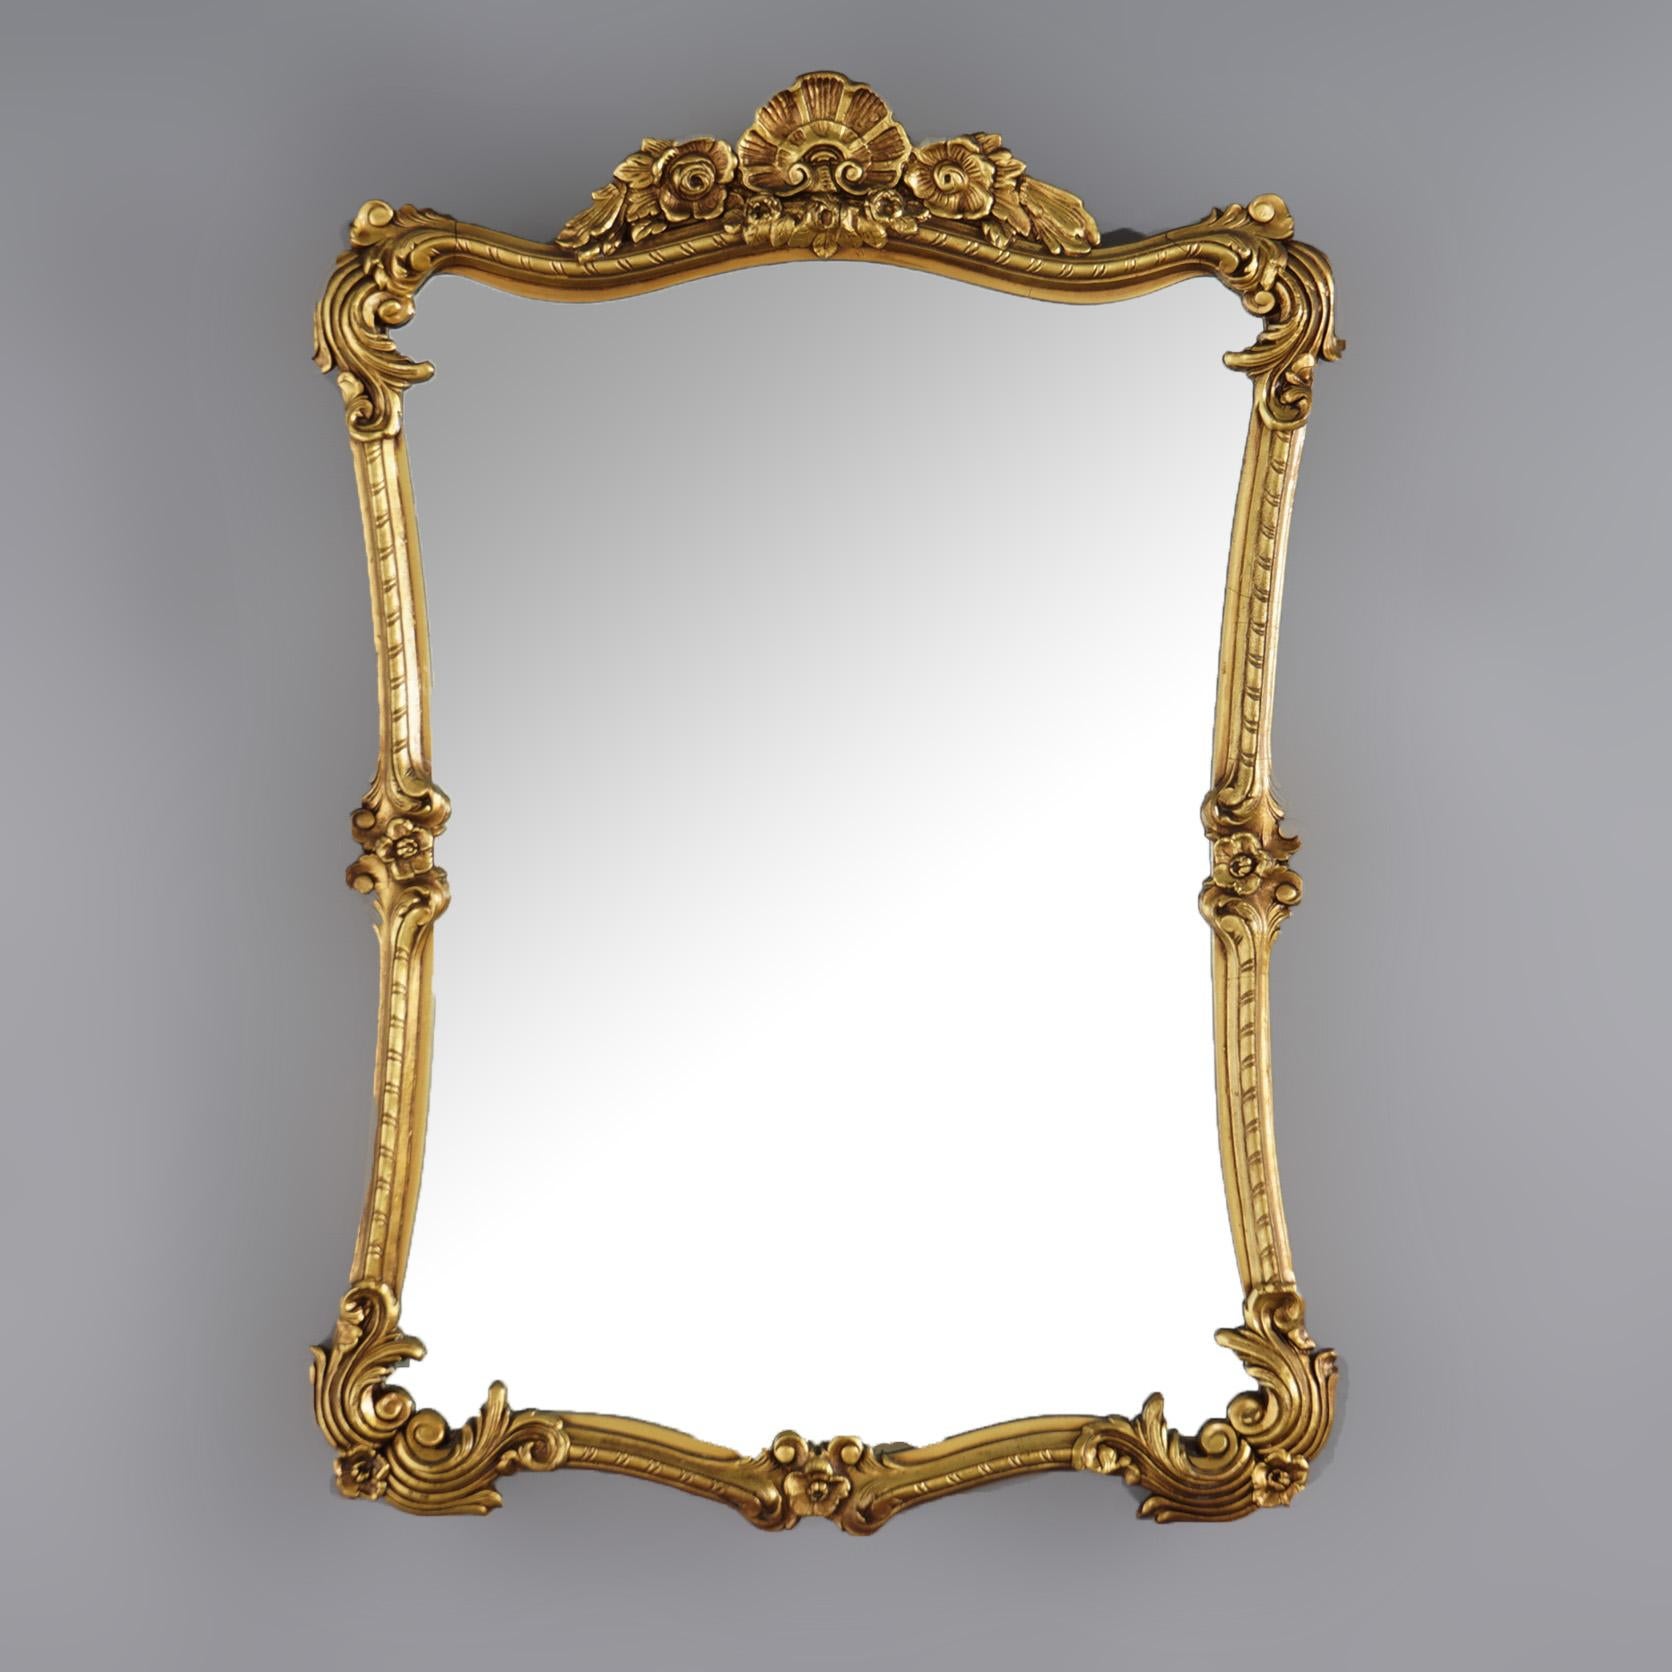 Antique French Giltwood Wall Mirror with Foliate Elements & Gadroon Crest, Circa 1930

Measures- 36''H x 25''W x 3''D; 30.5'' x 19.5'' sight